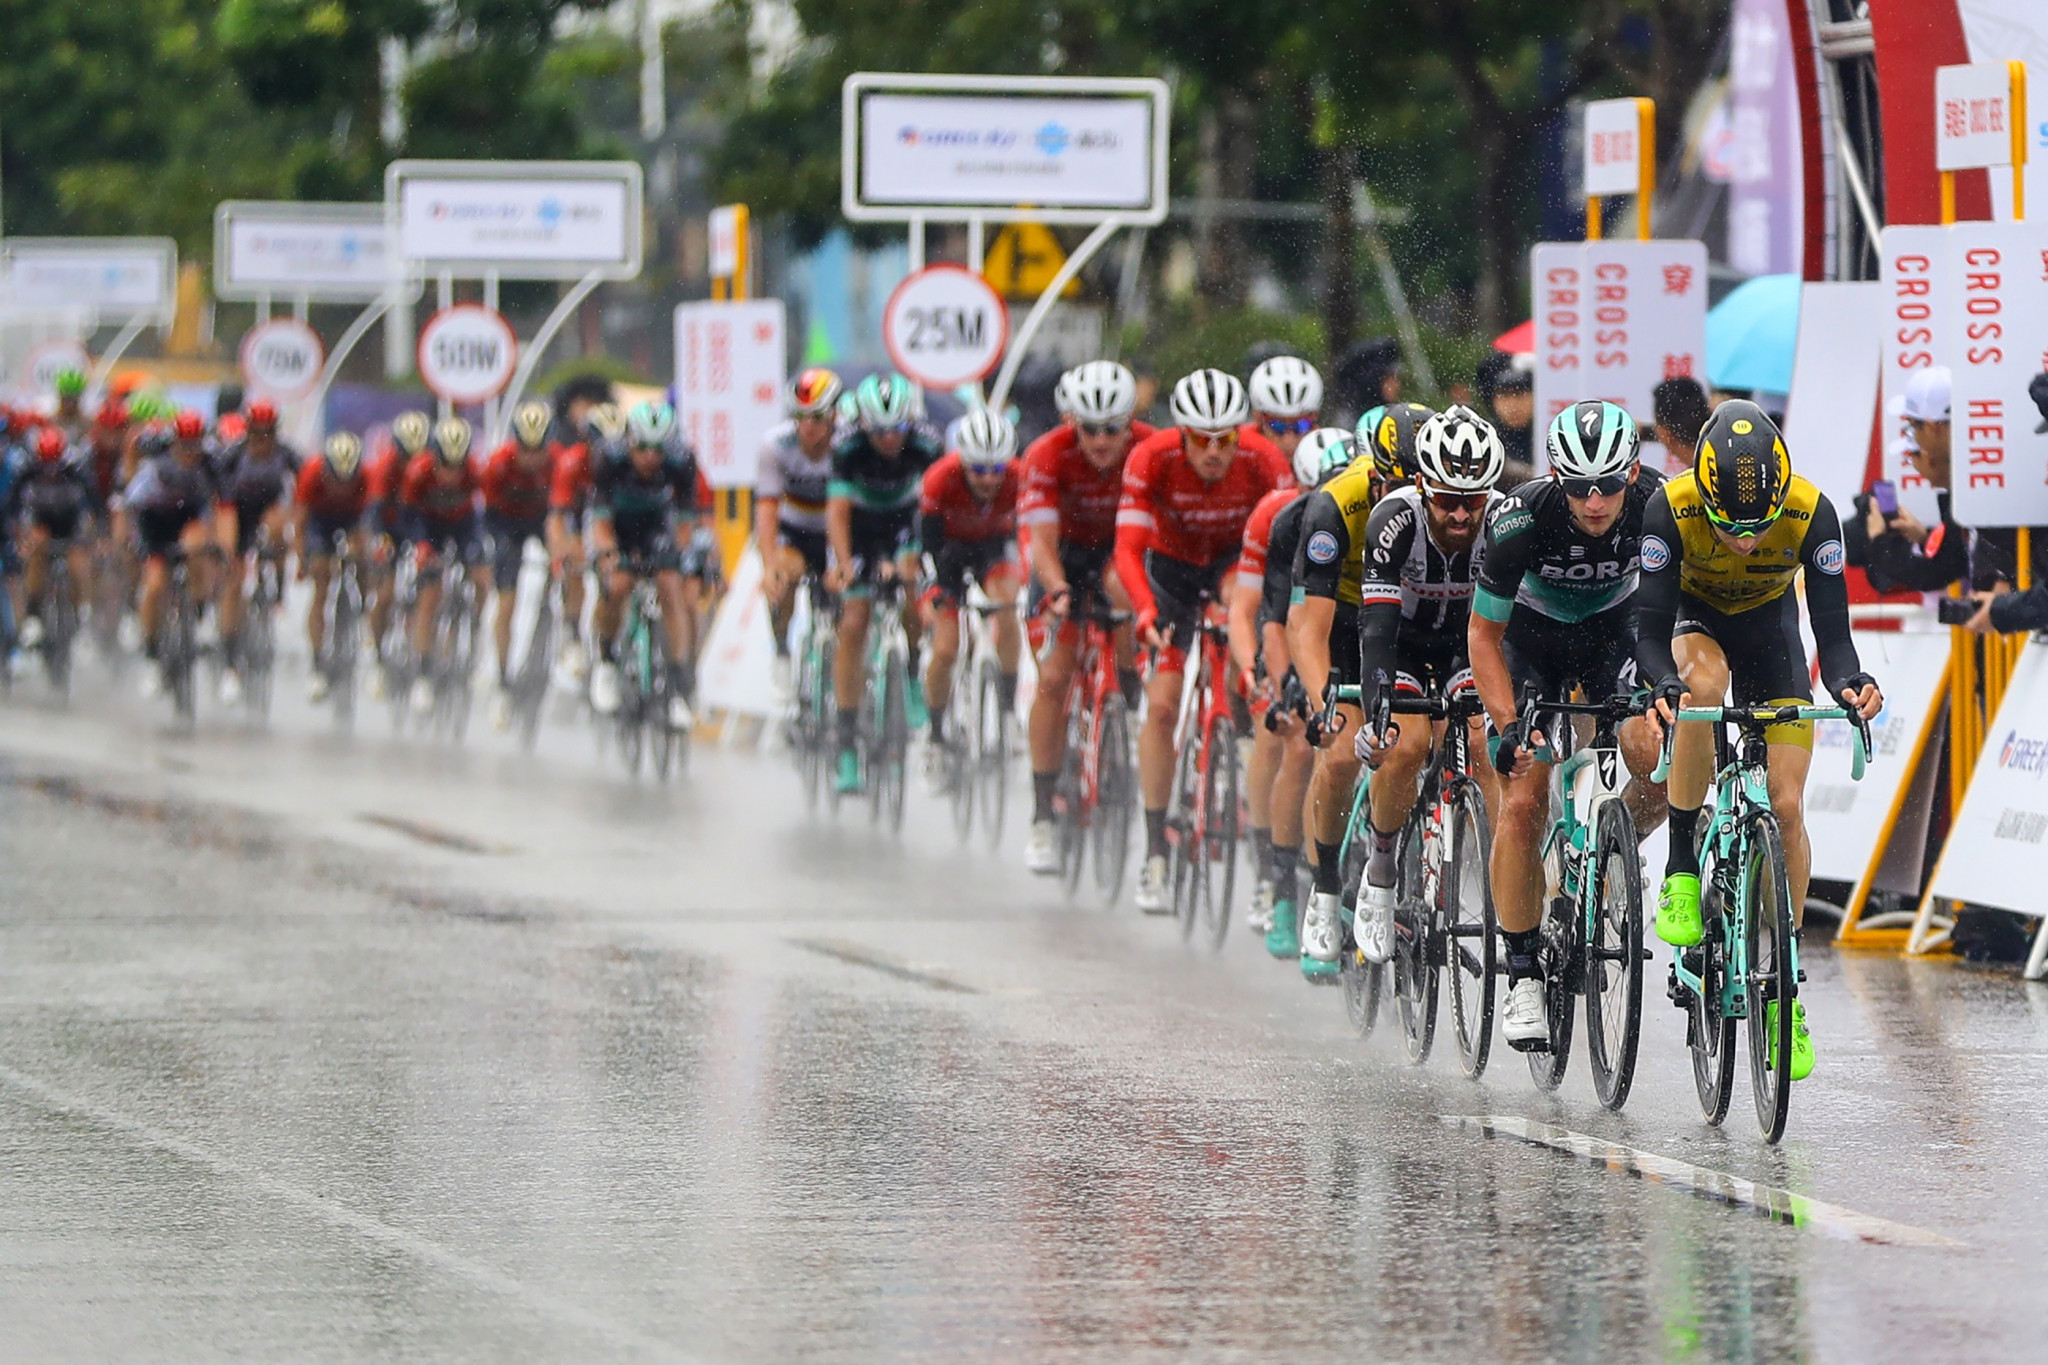 The deluge forced some riders, including Australia's Richie Porte, to retire from the race ©Getty Images